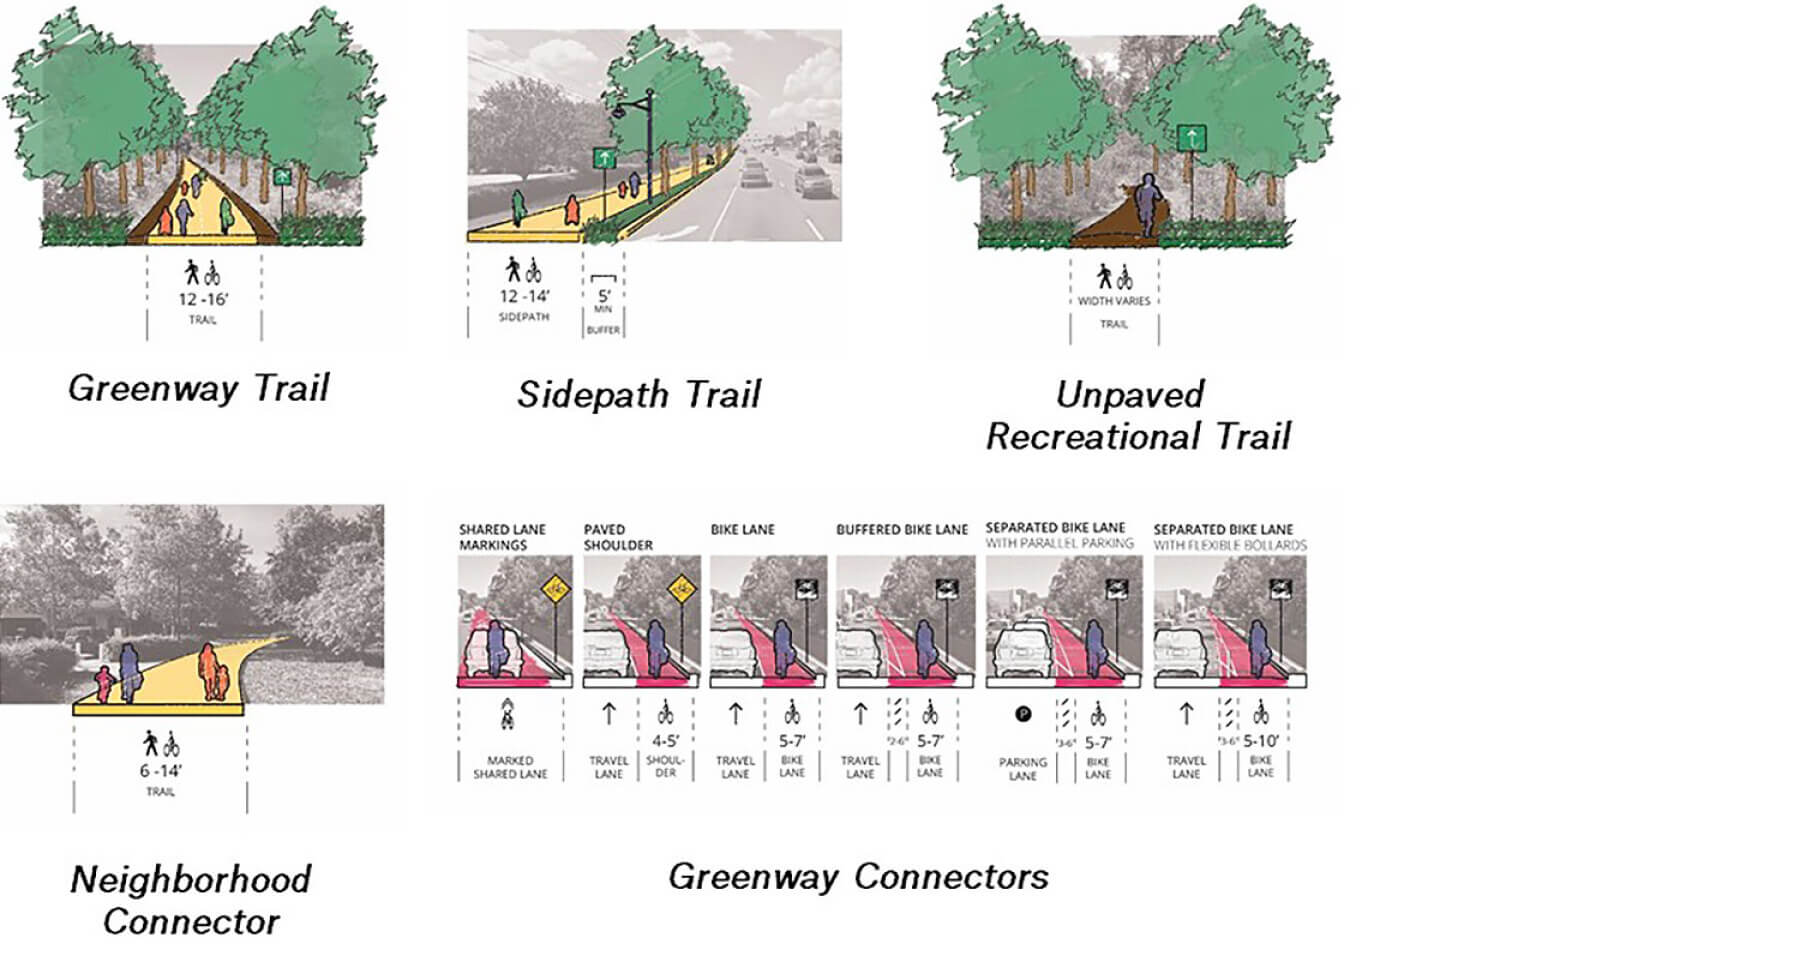 Options from Cobb County greenway plan